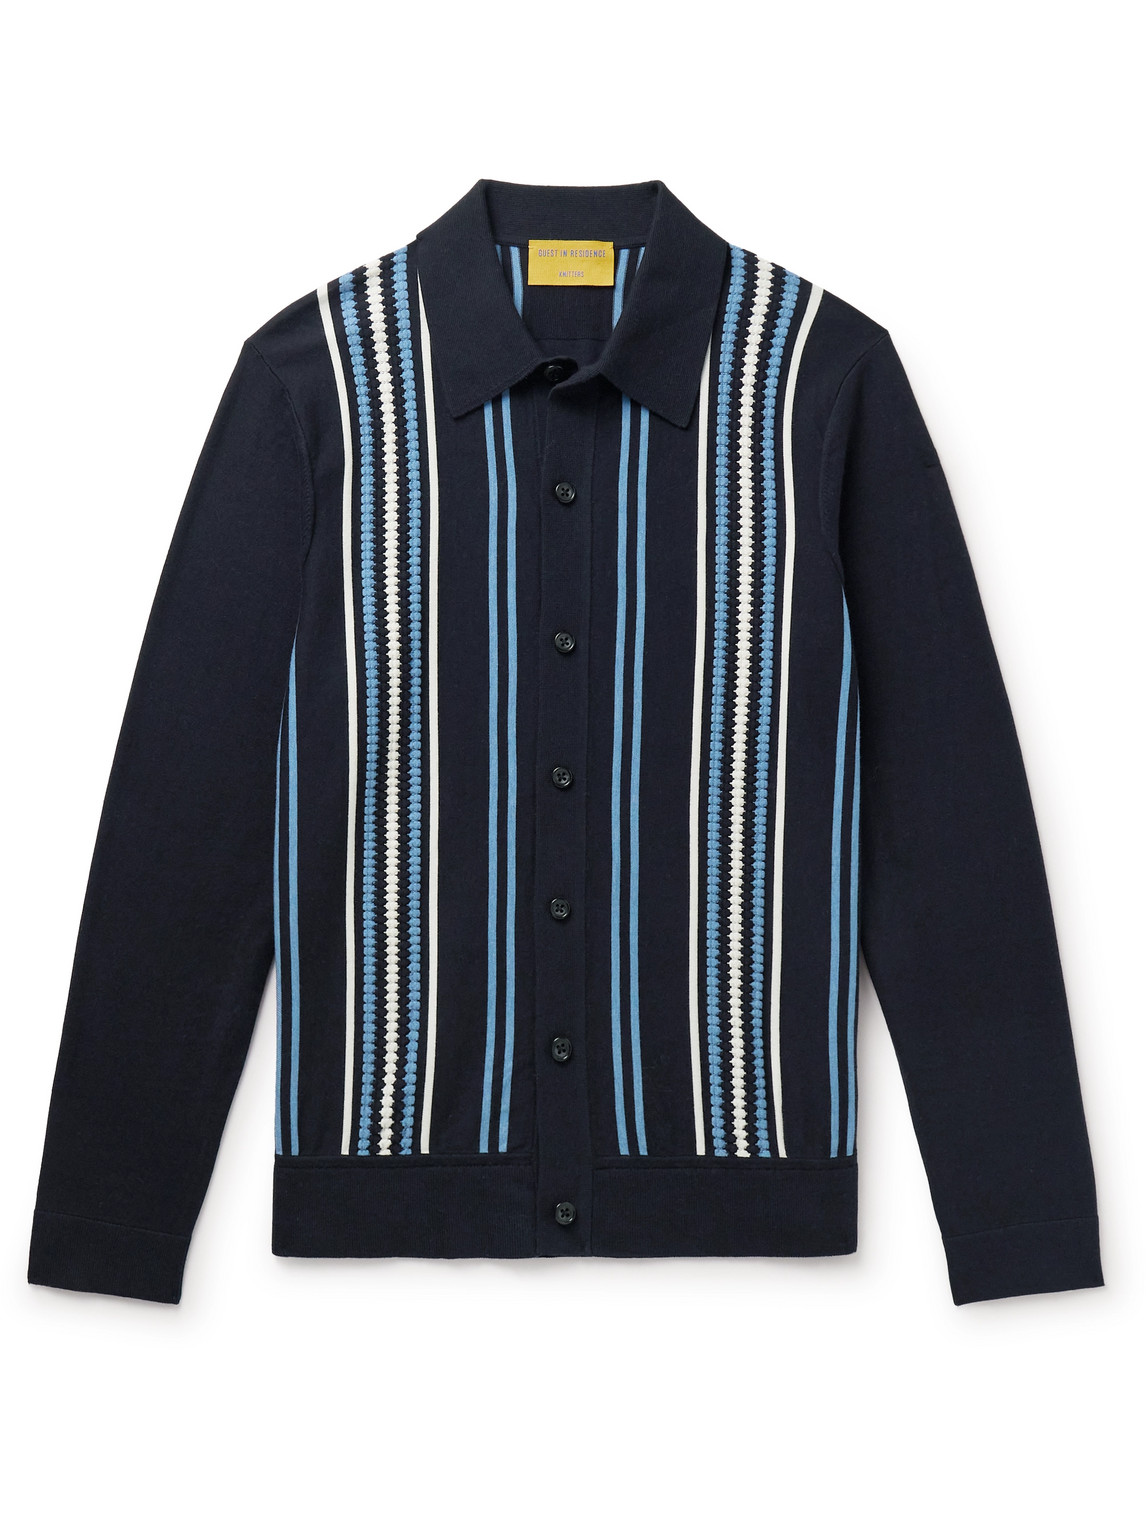 GUEST IN RESIDENCE PLAZA SLIM-FIT STRIPED COTTON CARDIGAN